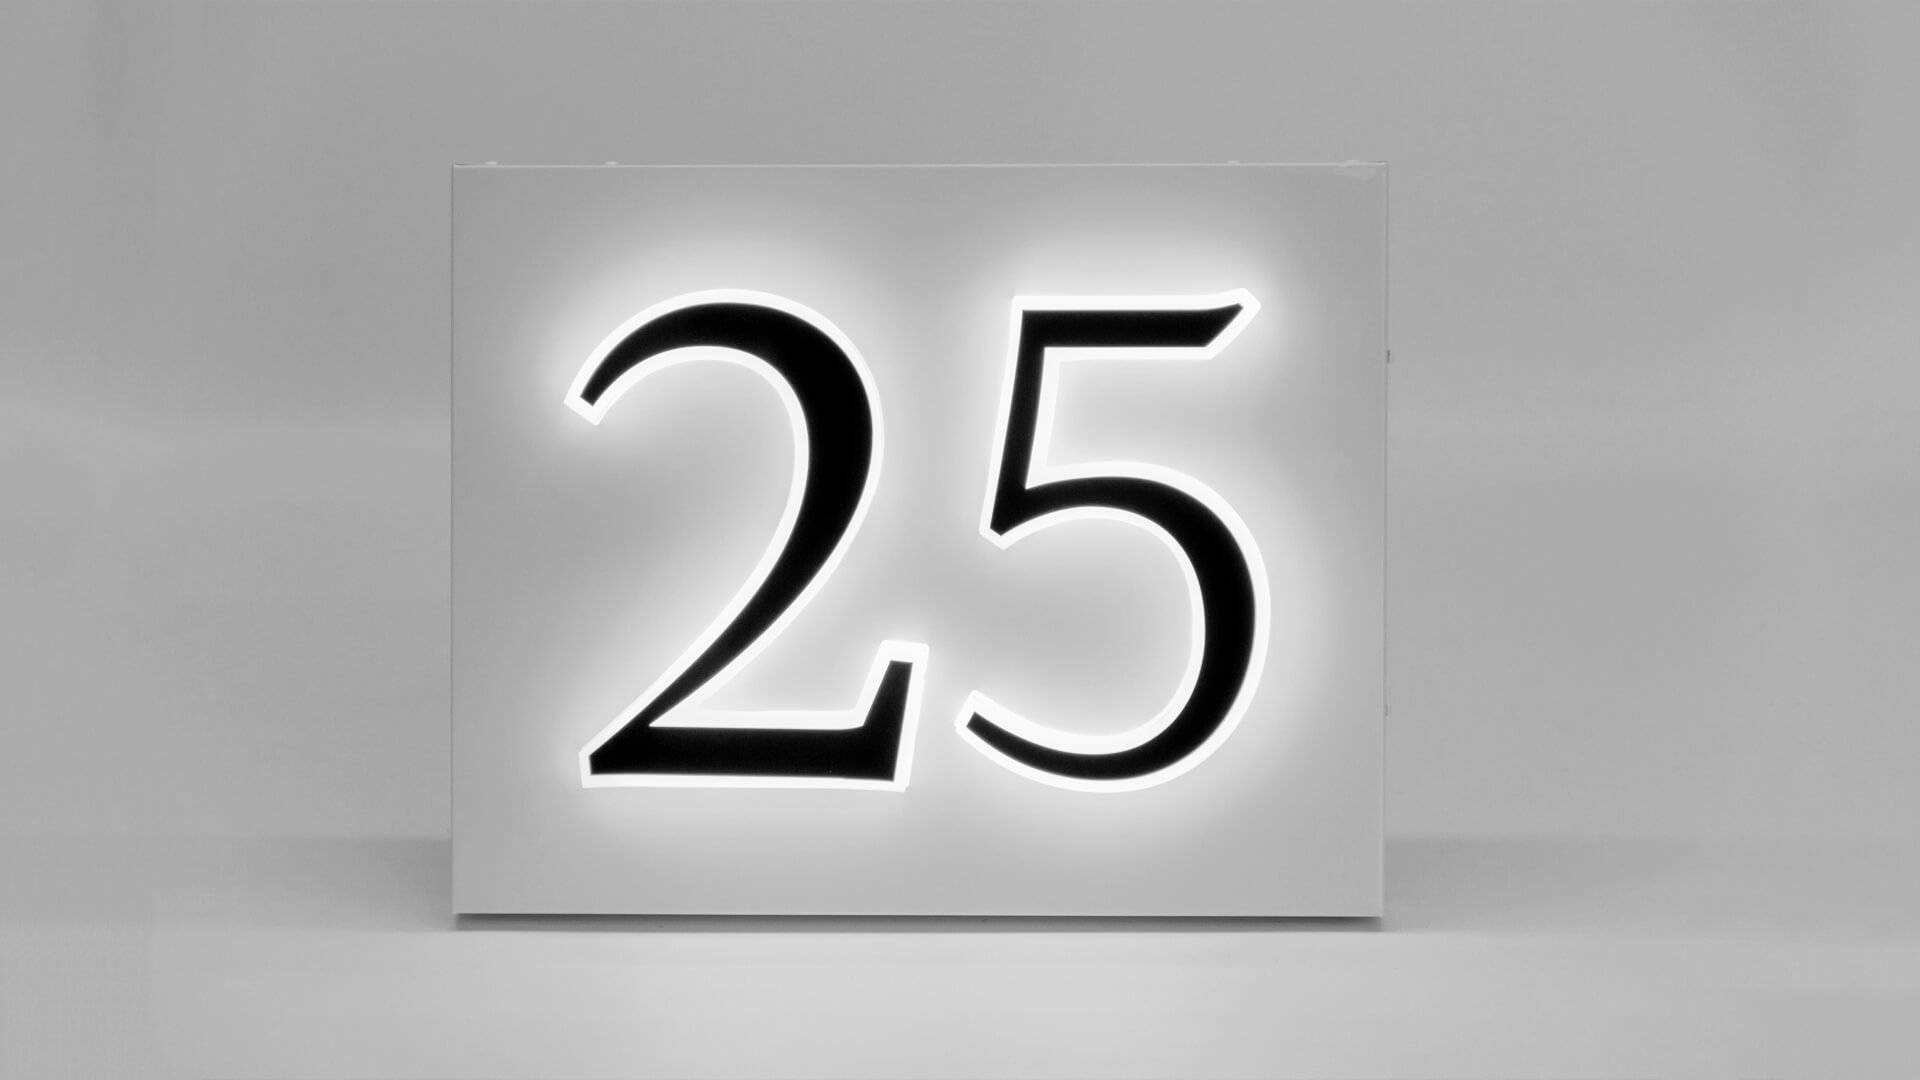 Frame numbering - Numbering of cages, residential buildings, illuminated LED